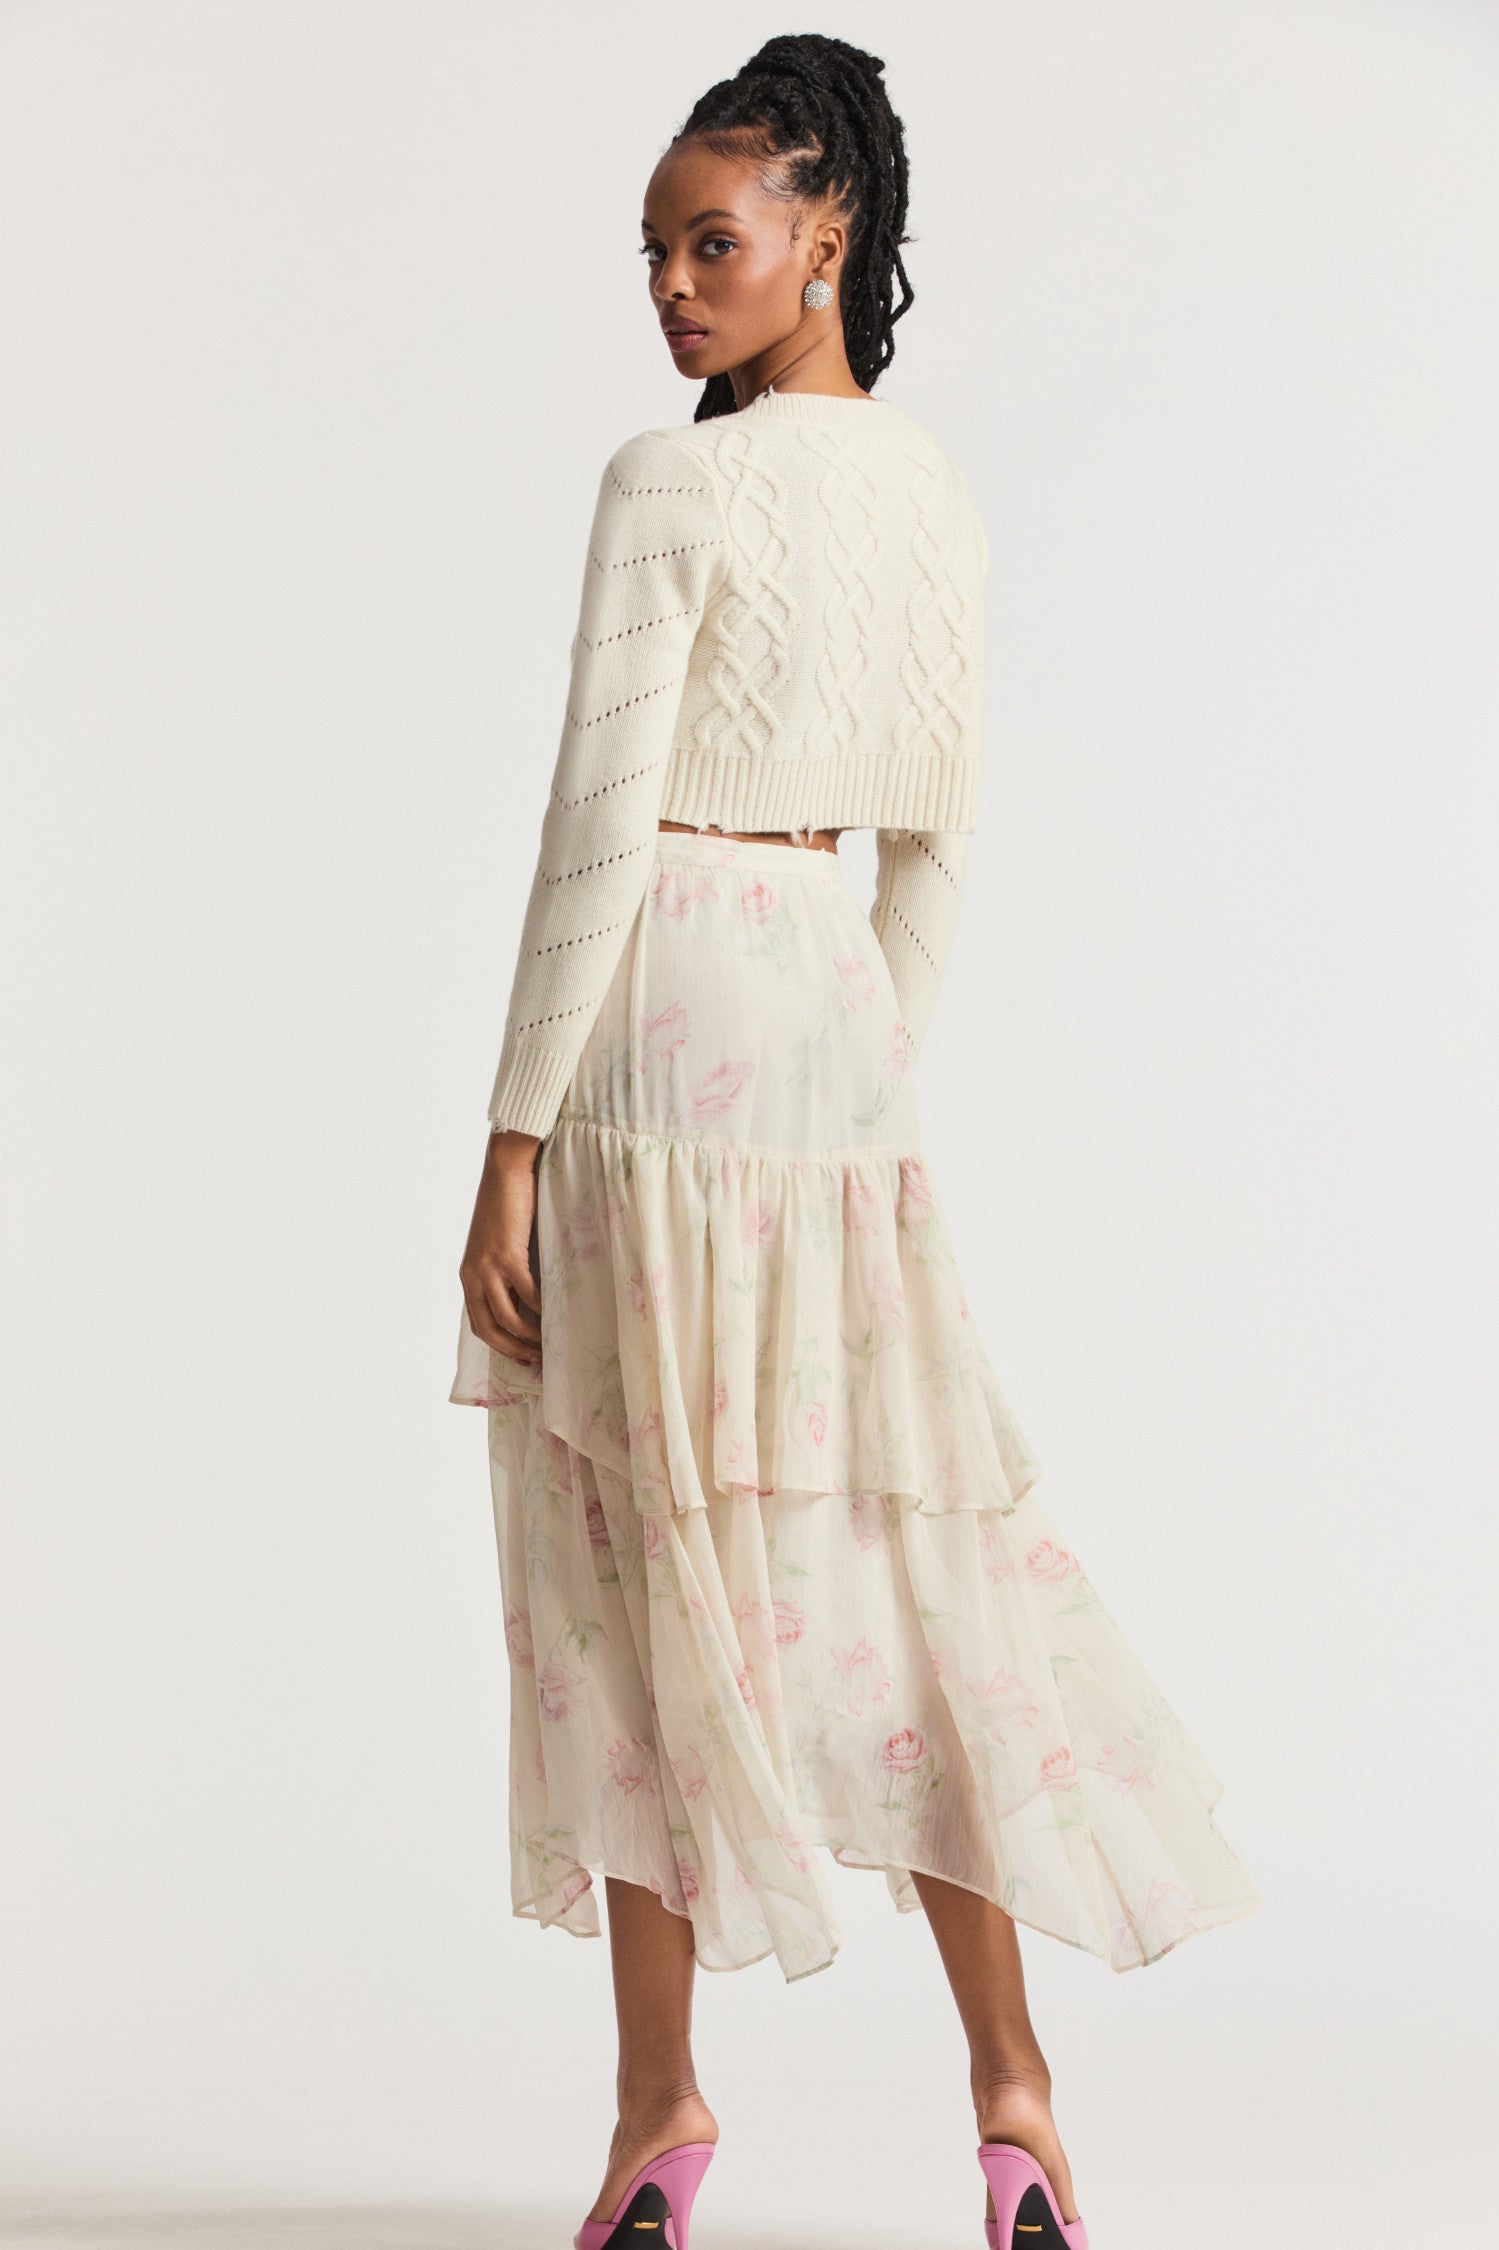 White maxi skirt in chiffon and rose print all over. Features a fixed waistband and falls into two elongated tiers with handkerchief hems.